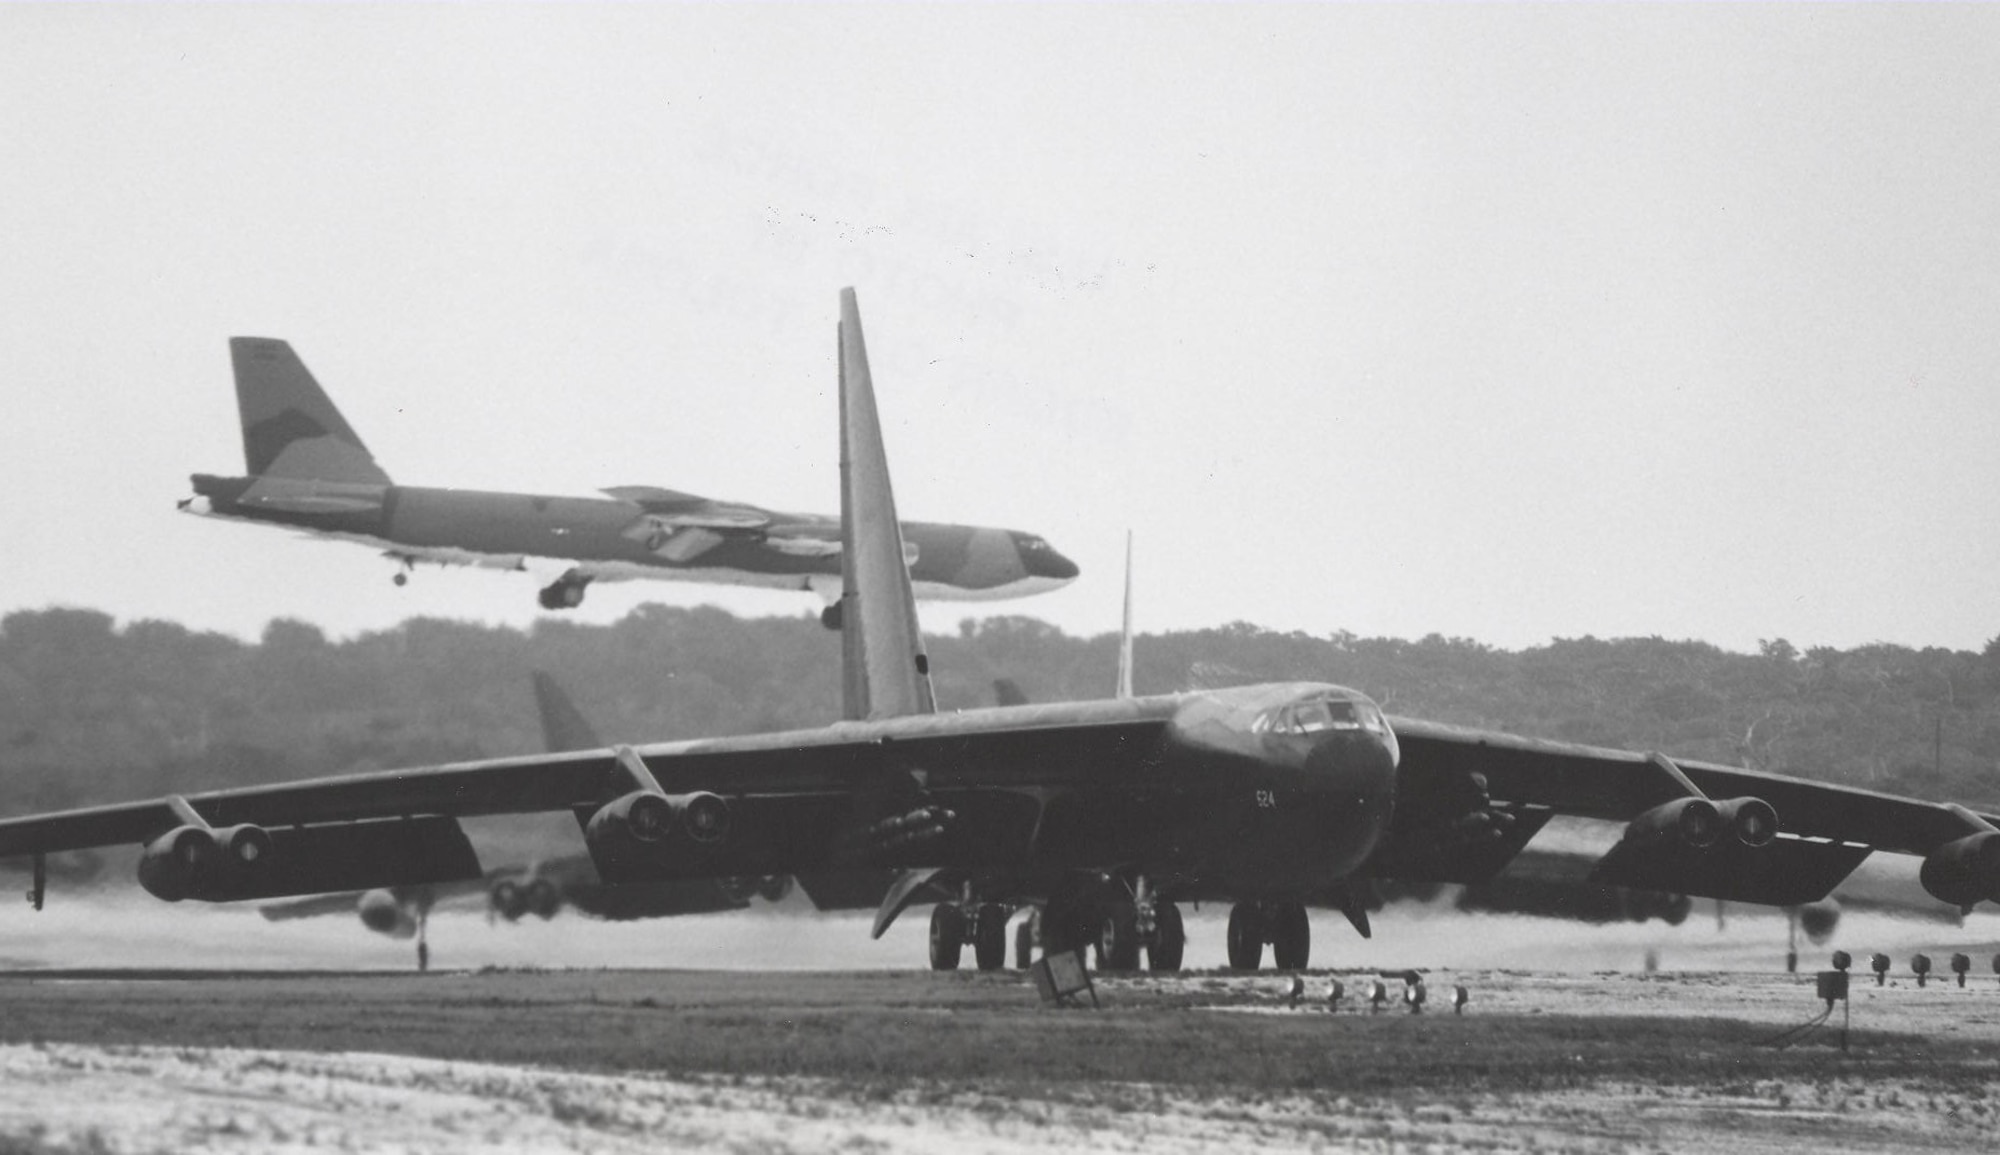 B-52s landing and taking off at Andersen AFB, Guam, during Operation Arc Light.